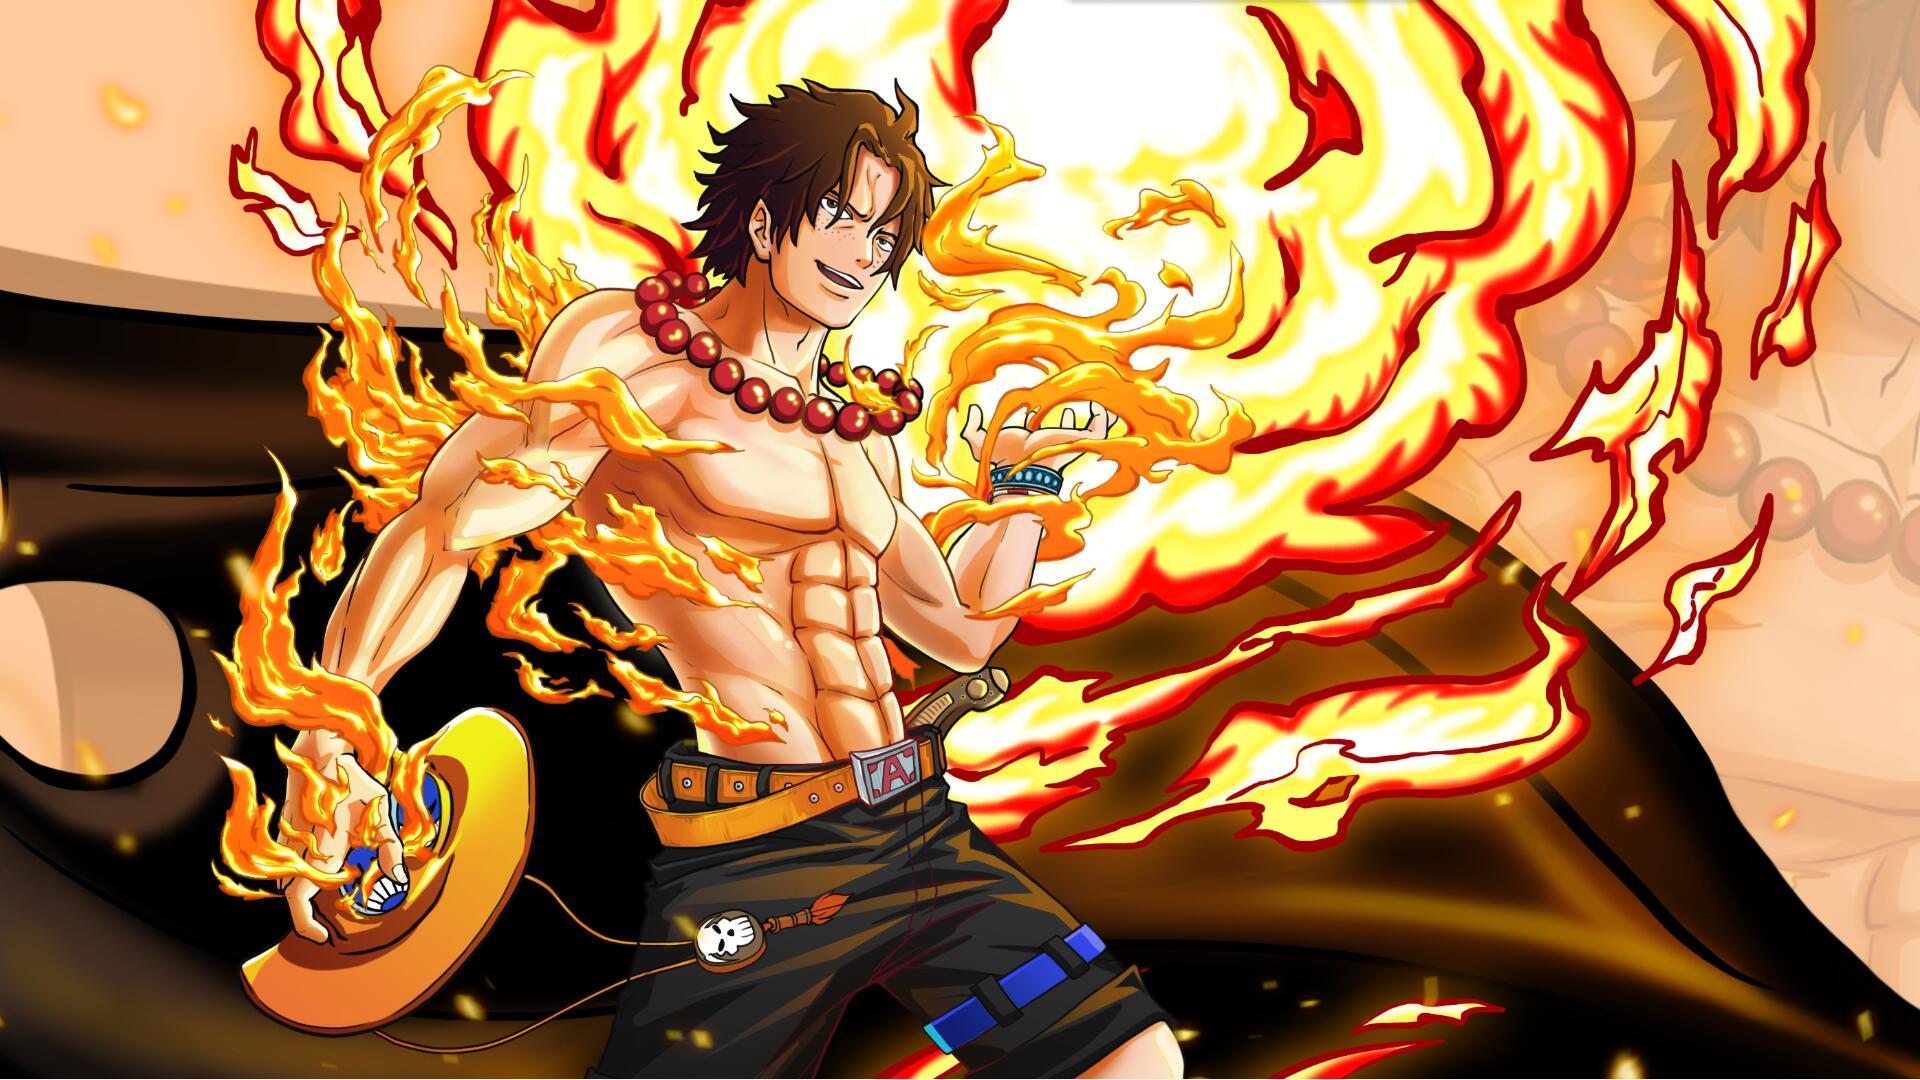 Ace One Piece Wallpapers HD - Wallpaper Cave